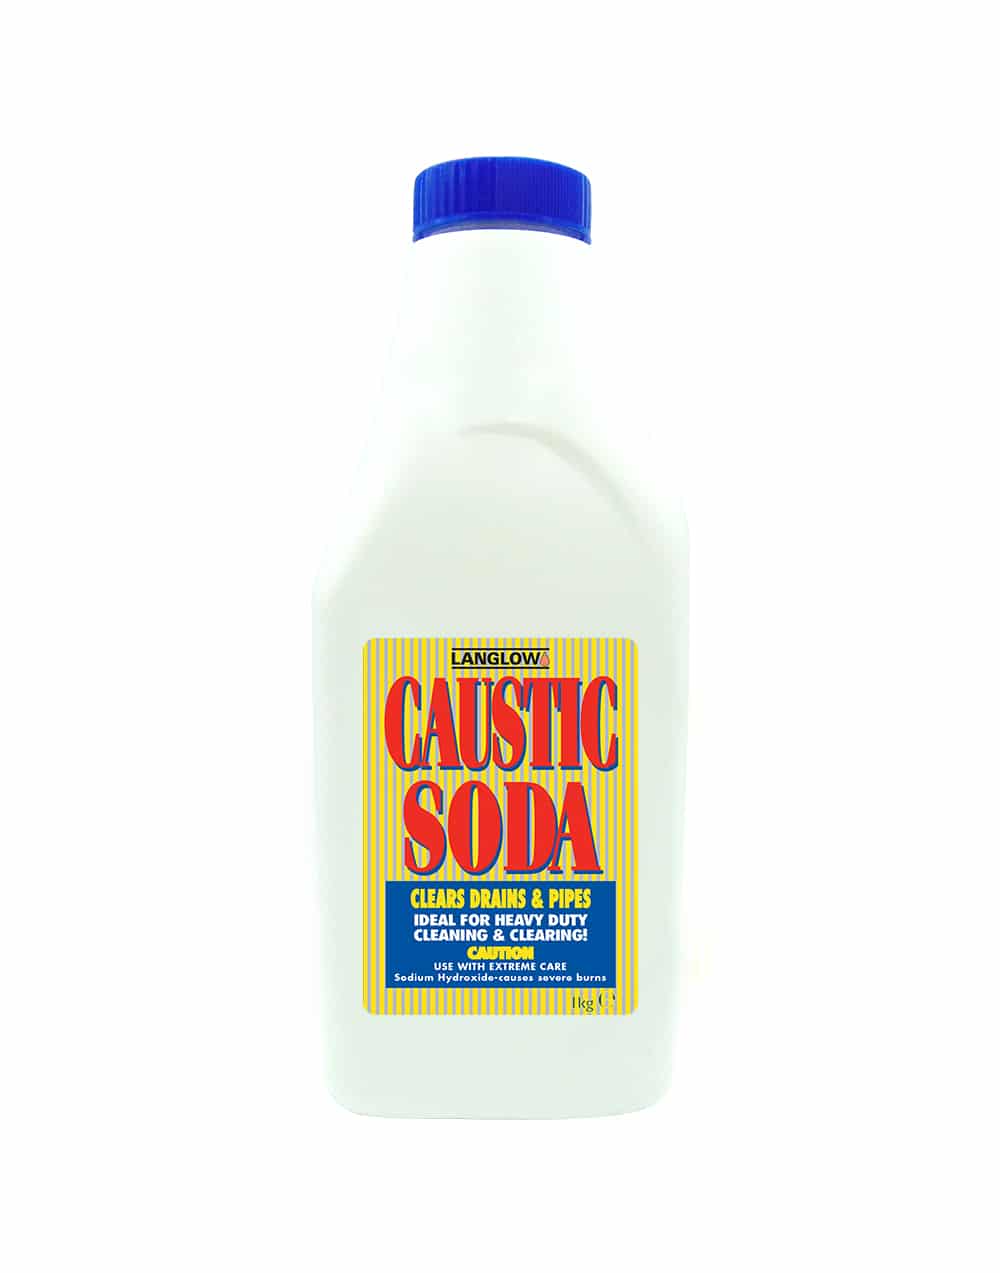 Caustic Soda - Palace Chemicals